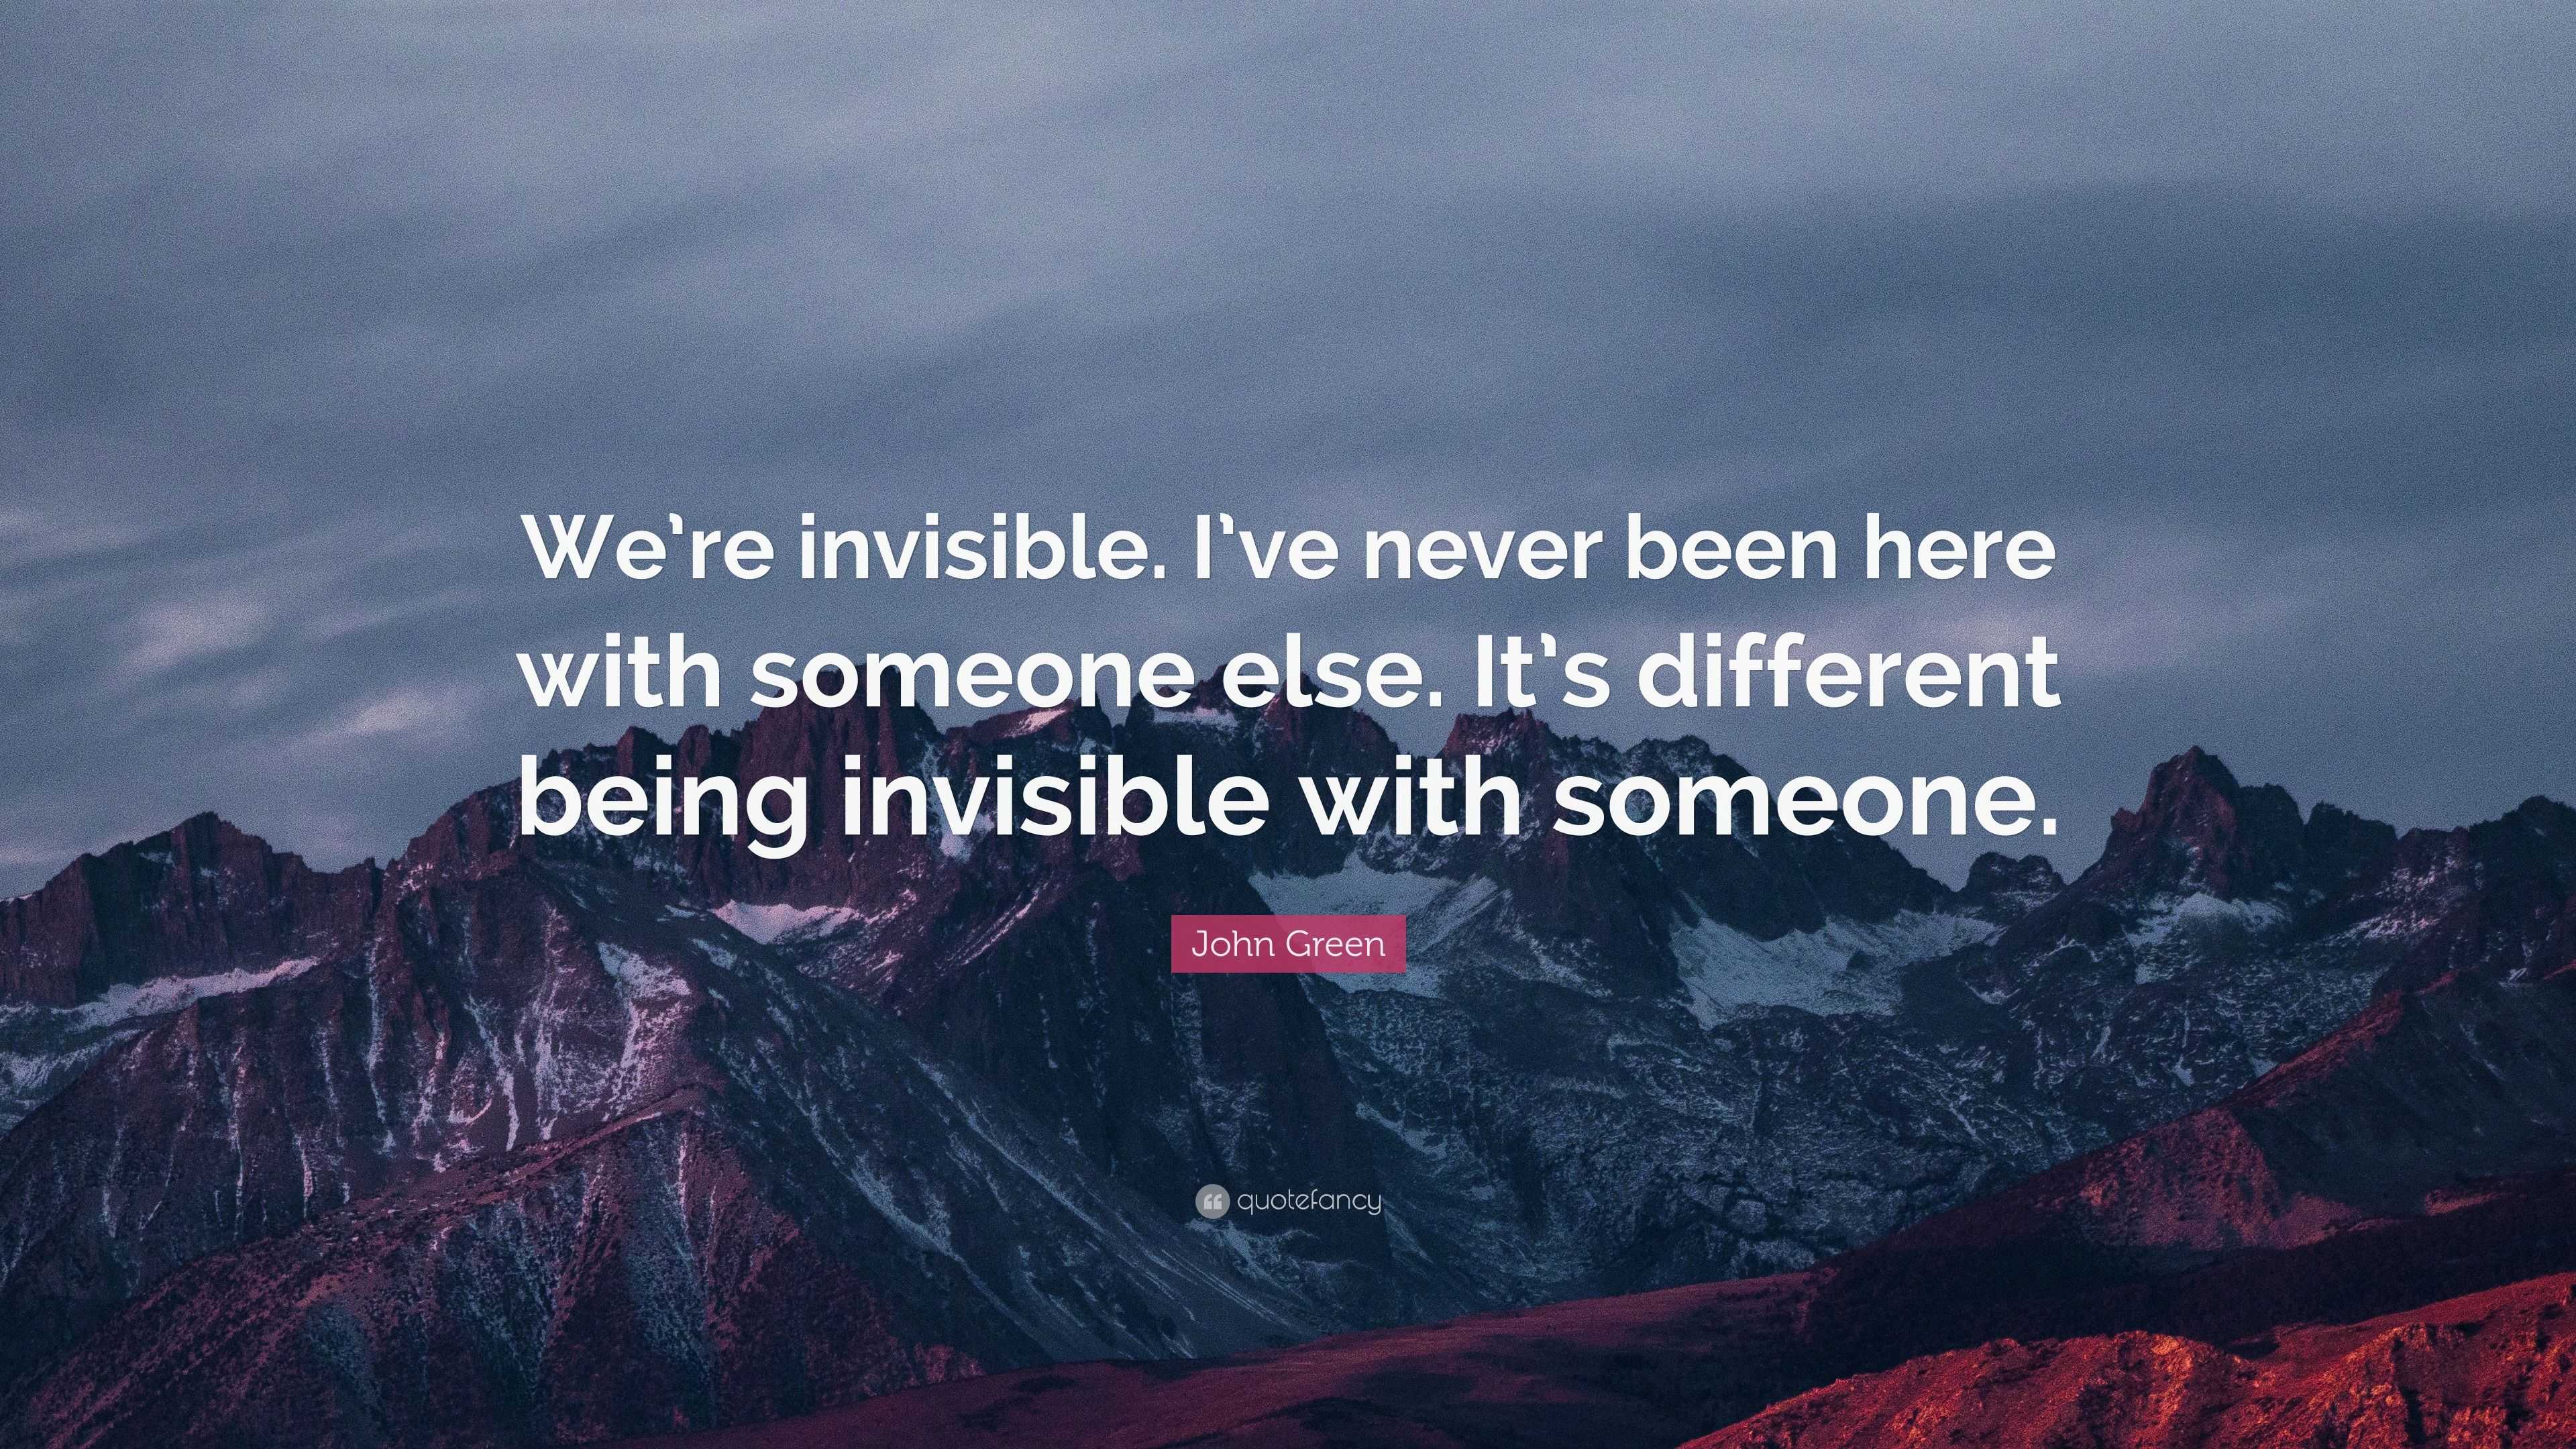 John Green Quote “were Invisible Ive Never Been Here With Someone